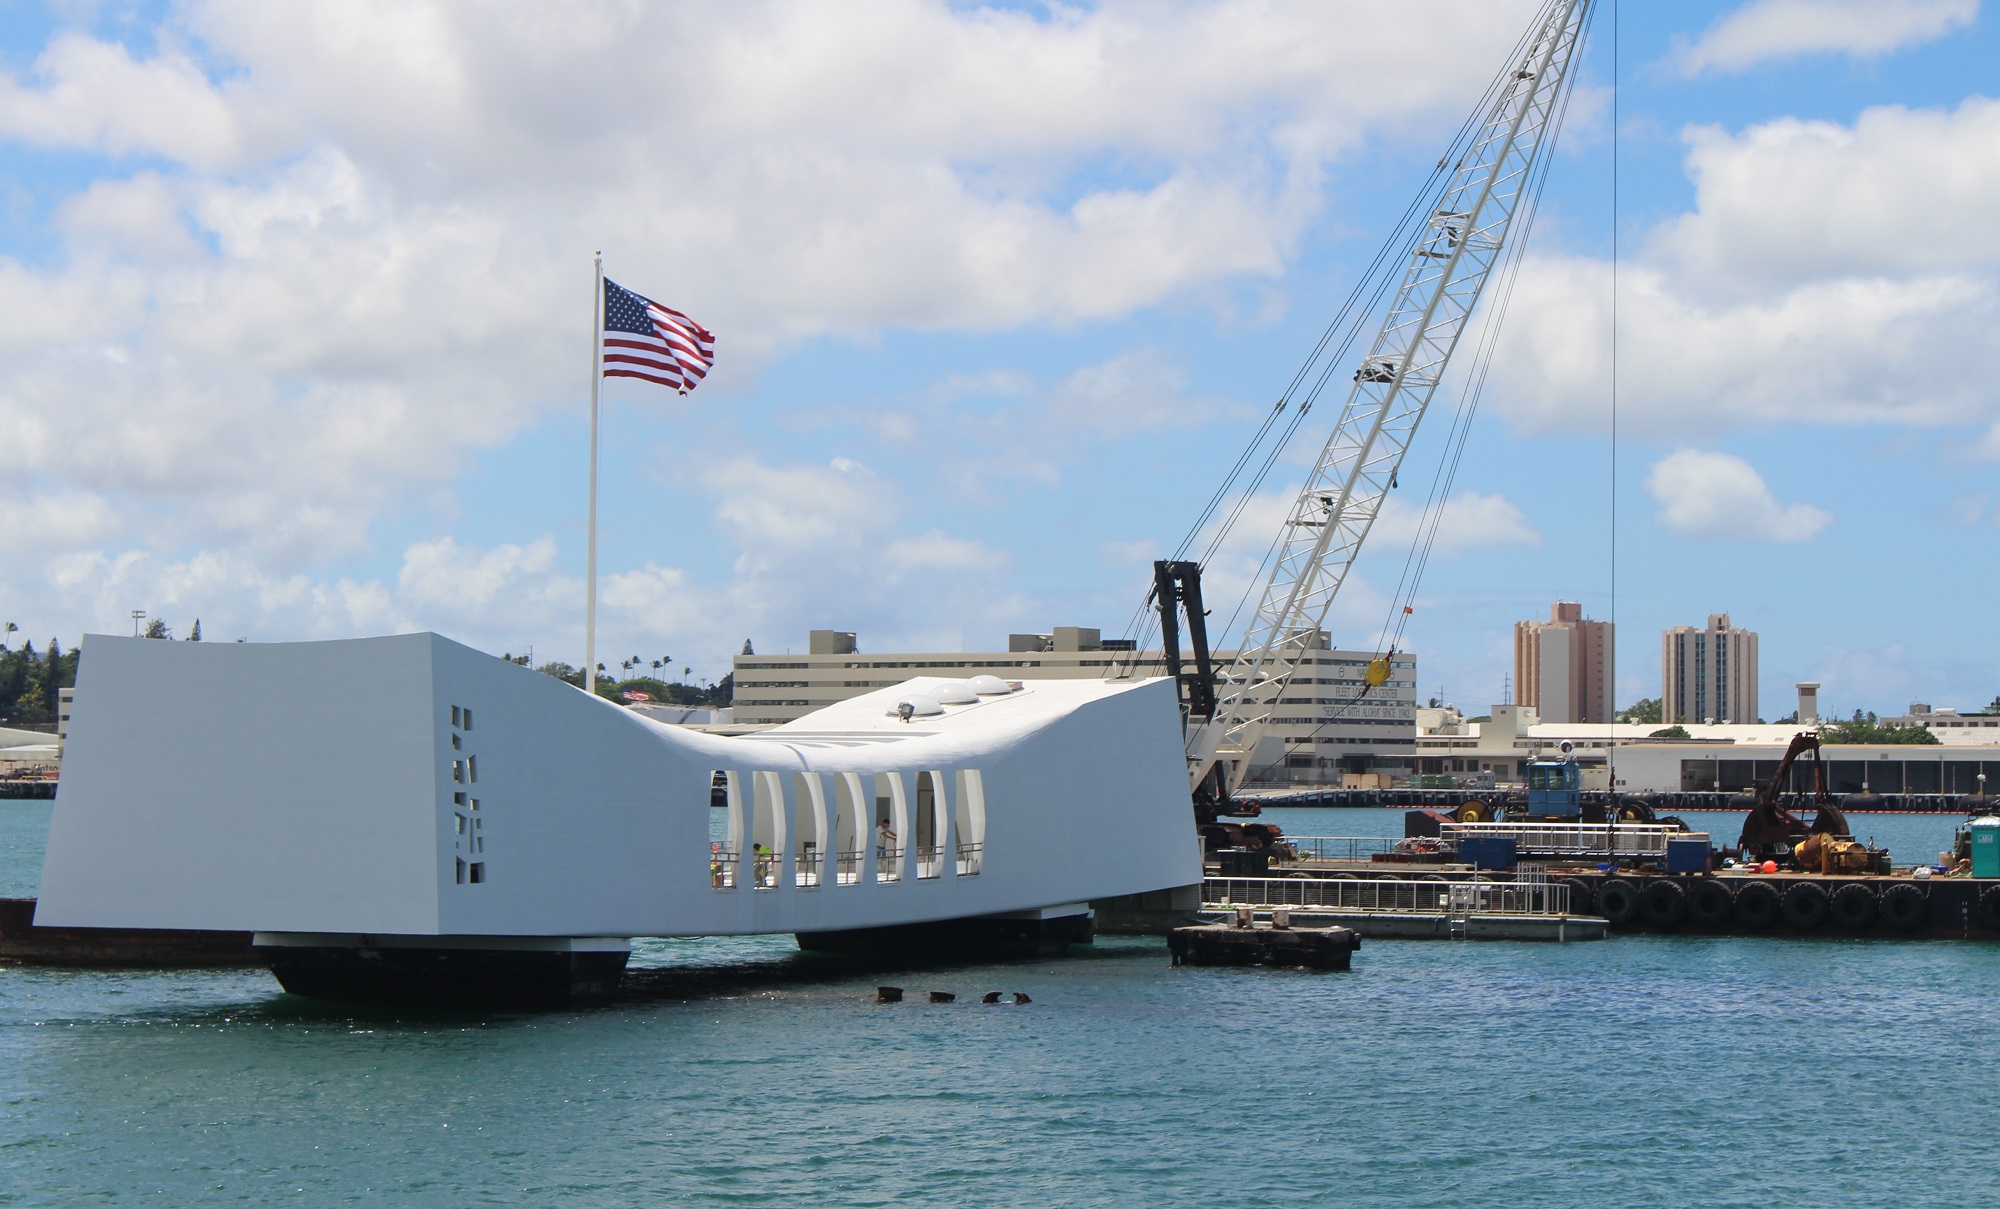 The USS Arizona Memorial and the new dock installation.